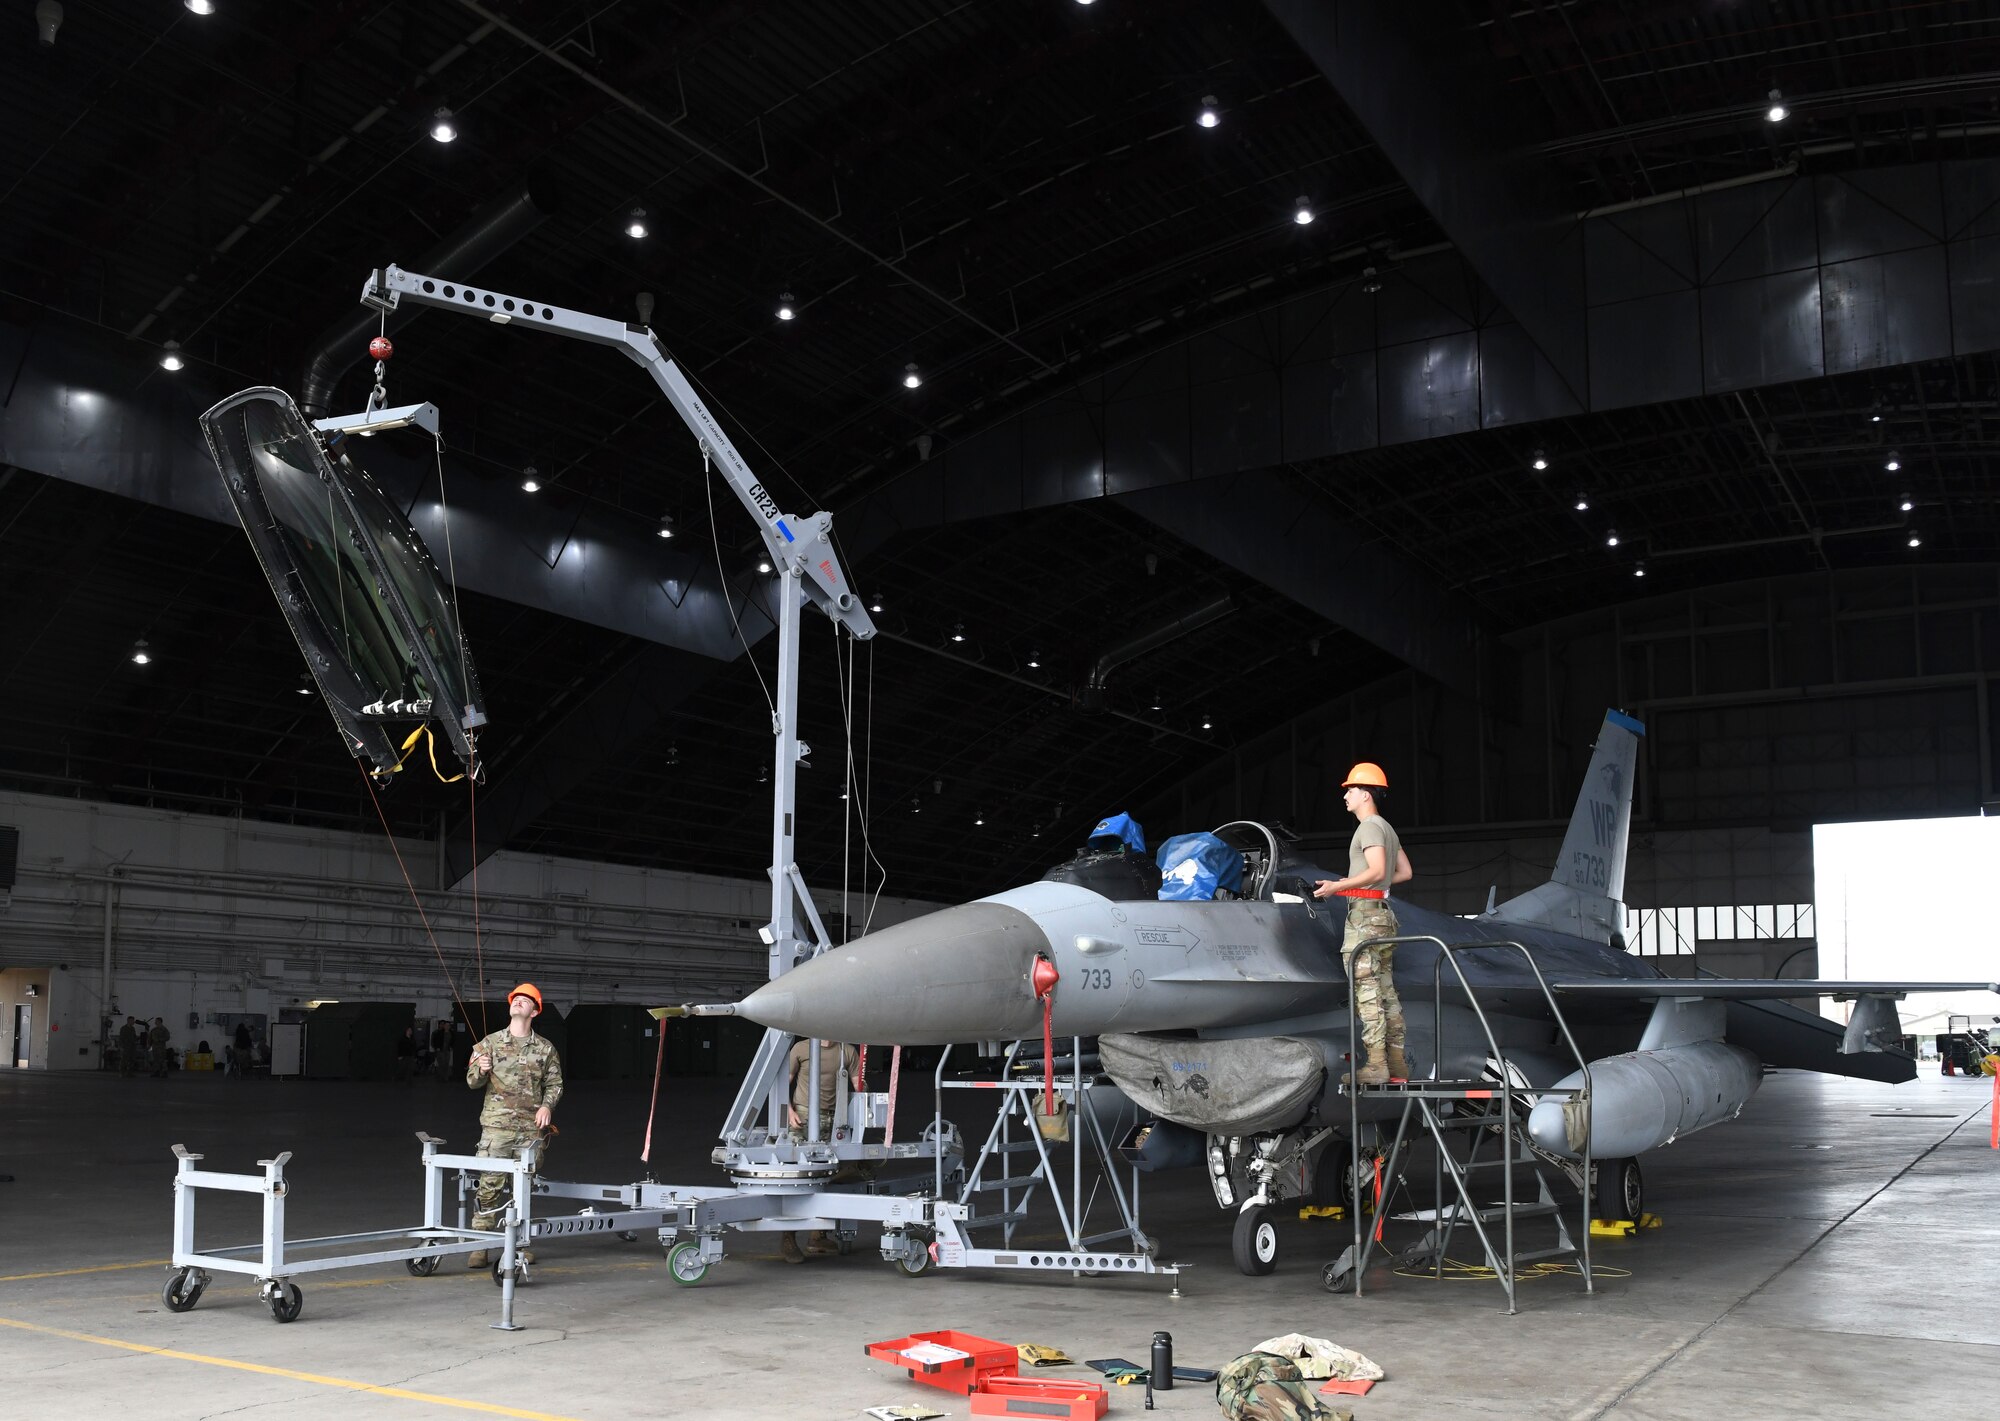 Military members working with a crane on a military jet